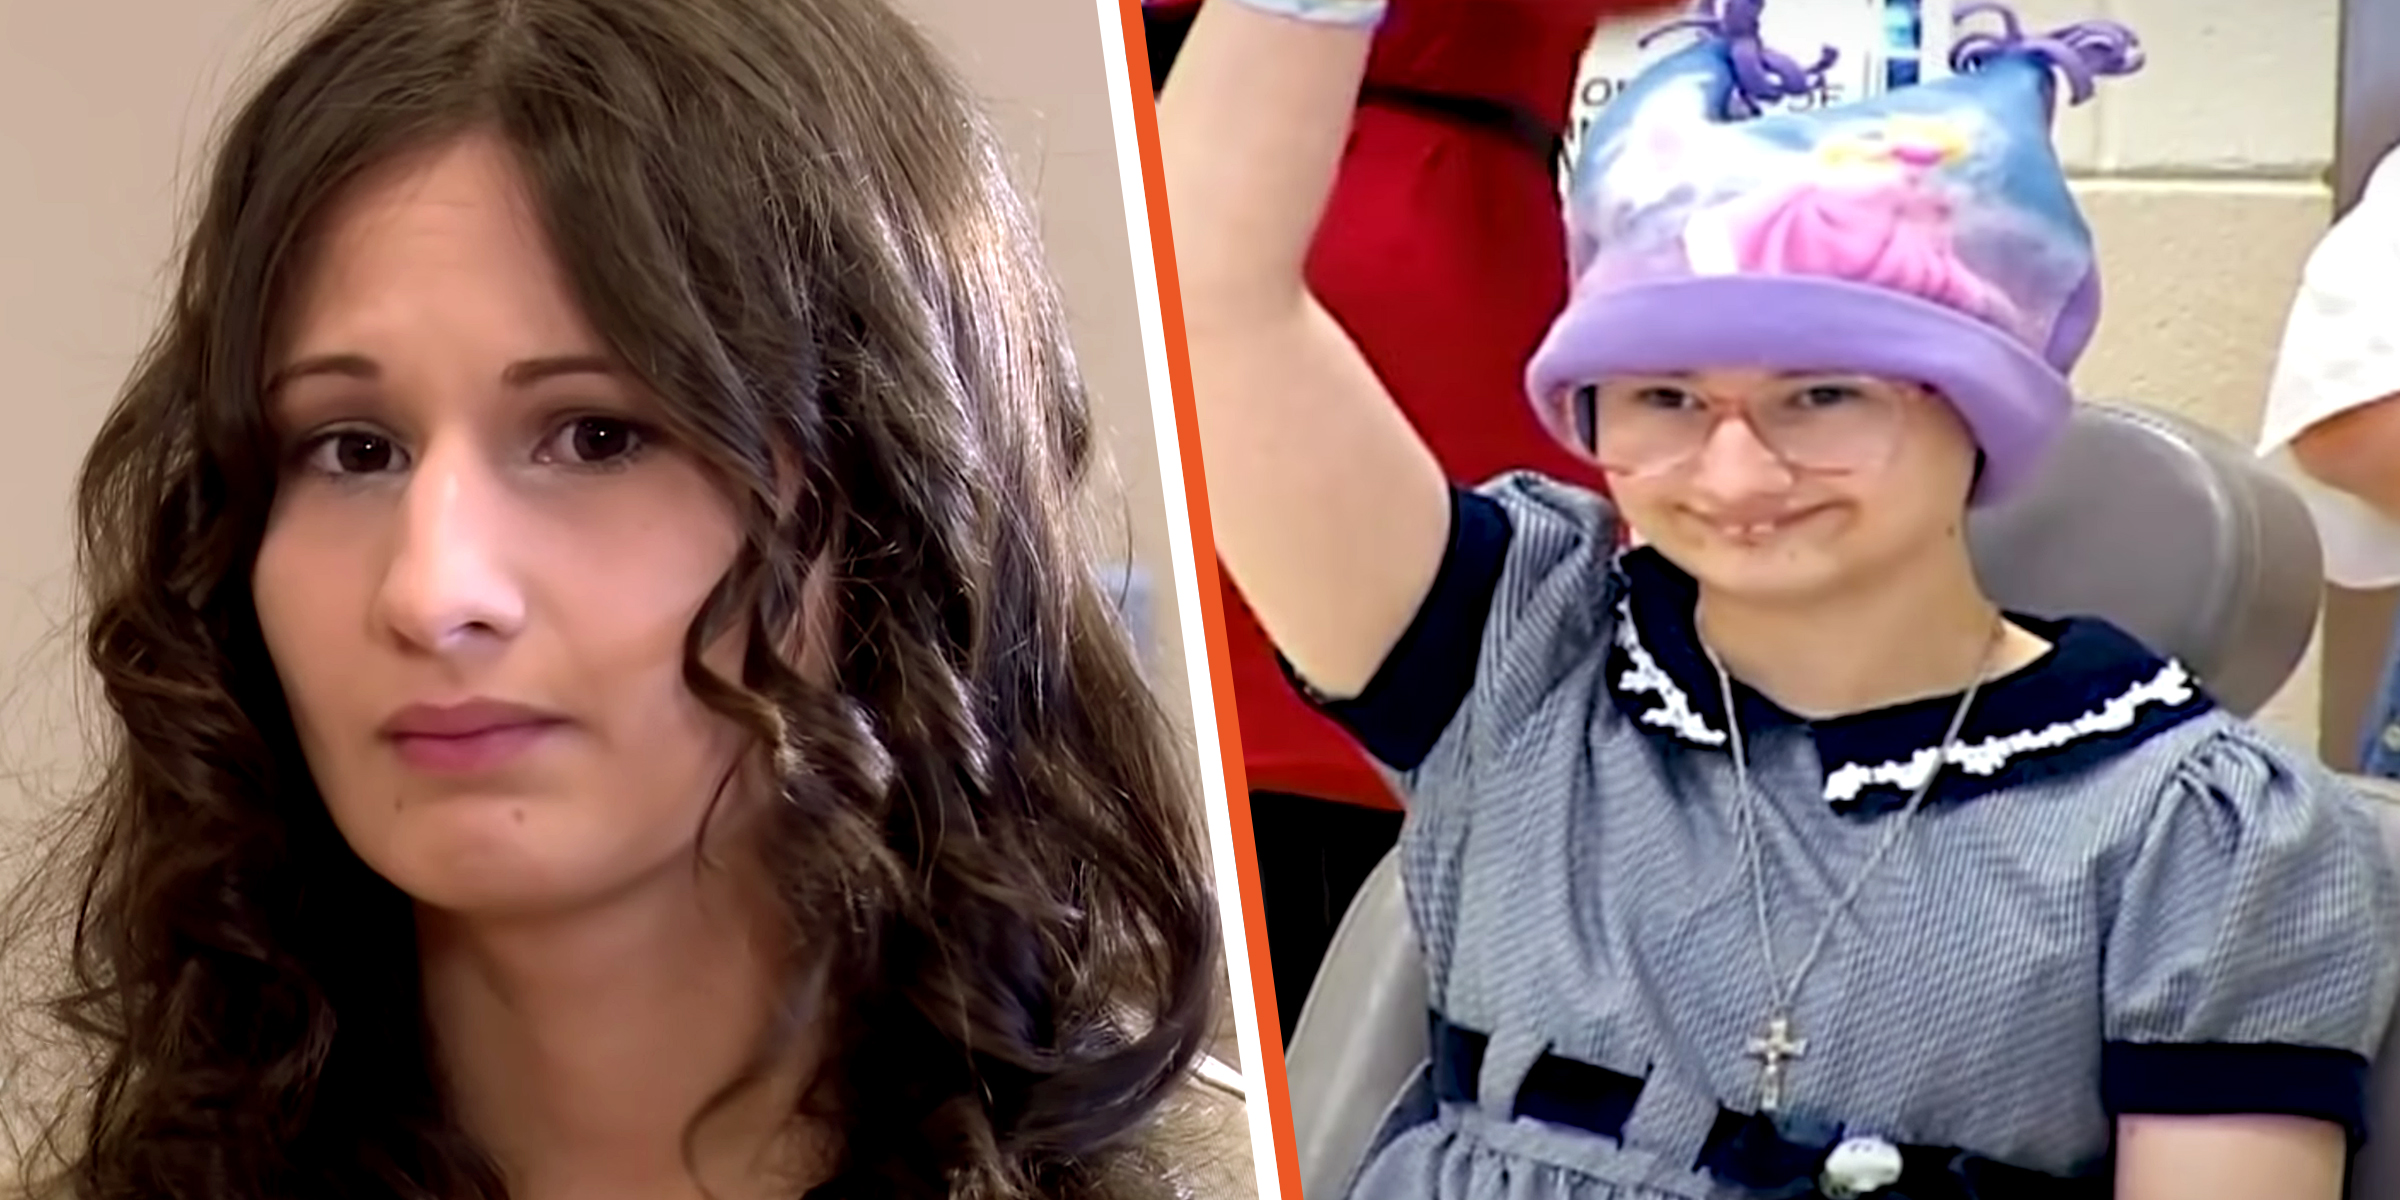 Gypsy Rose Blanchard | Source: YouTube/Dr. Phil